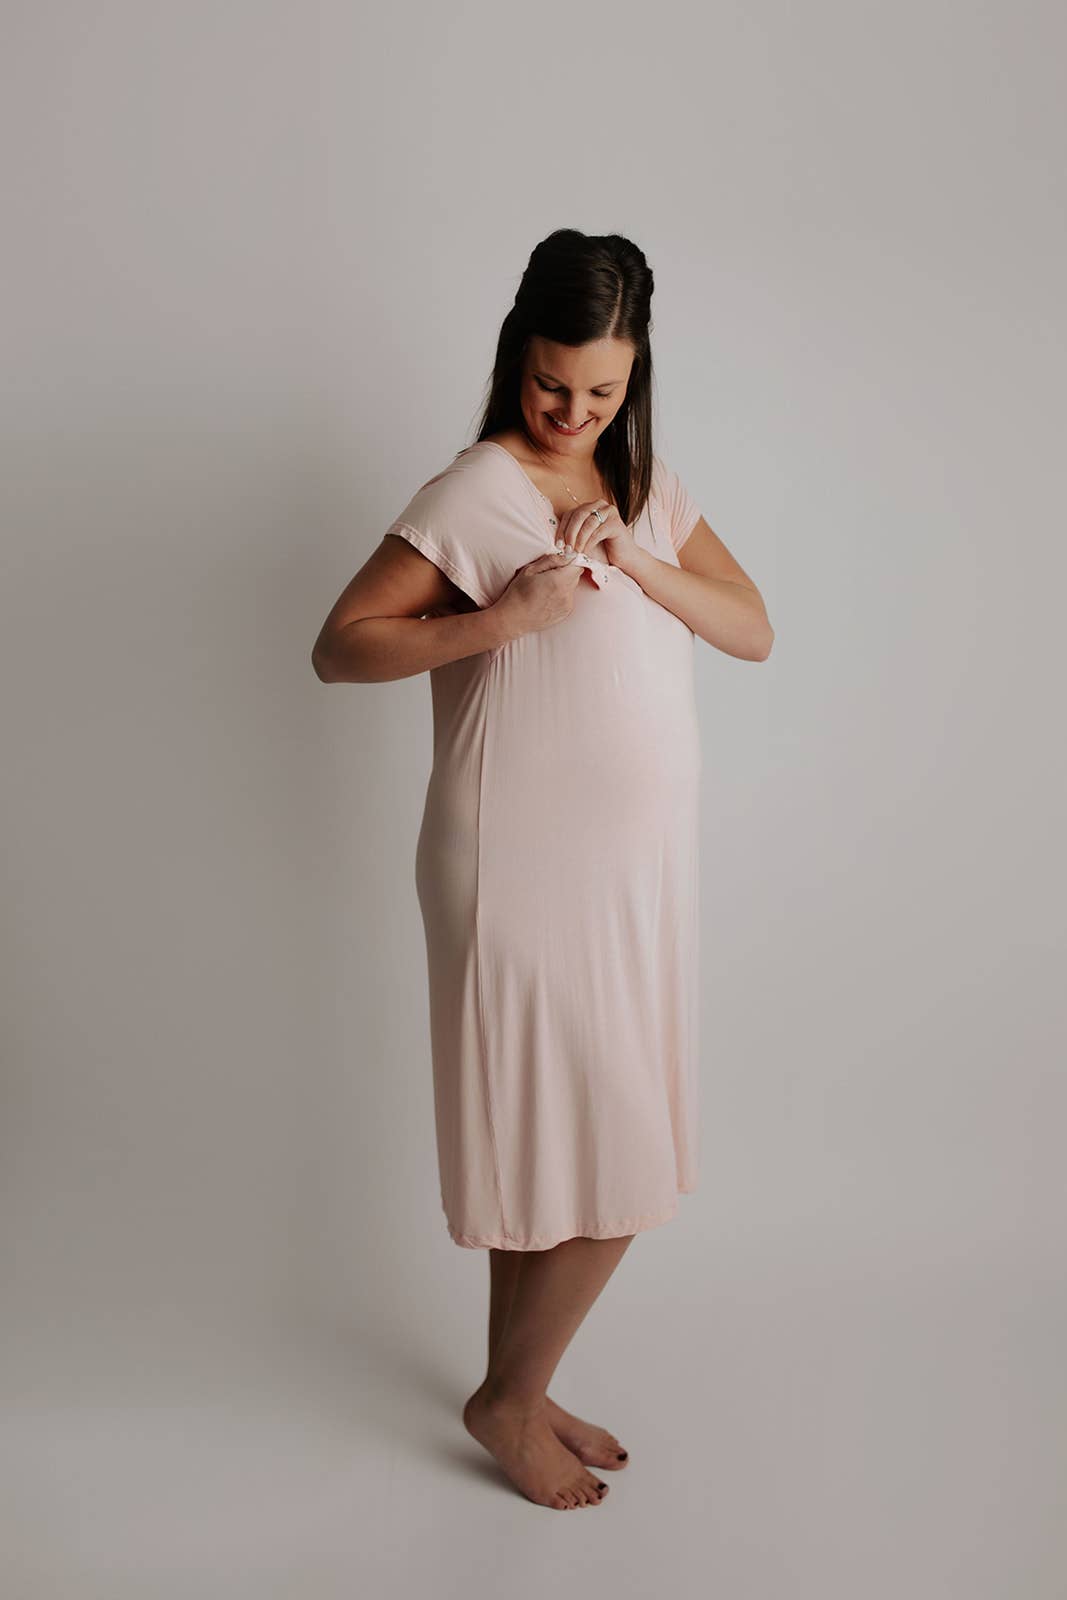 Heavenly Pink Mommy Labor and Delivery/ Nursing Gown - Origin Maternity 